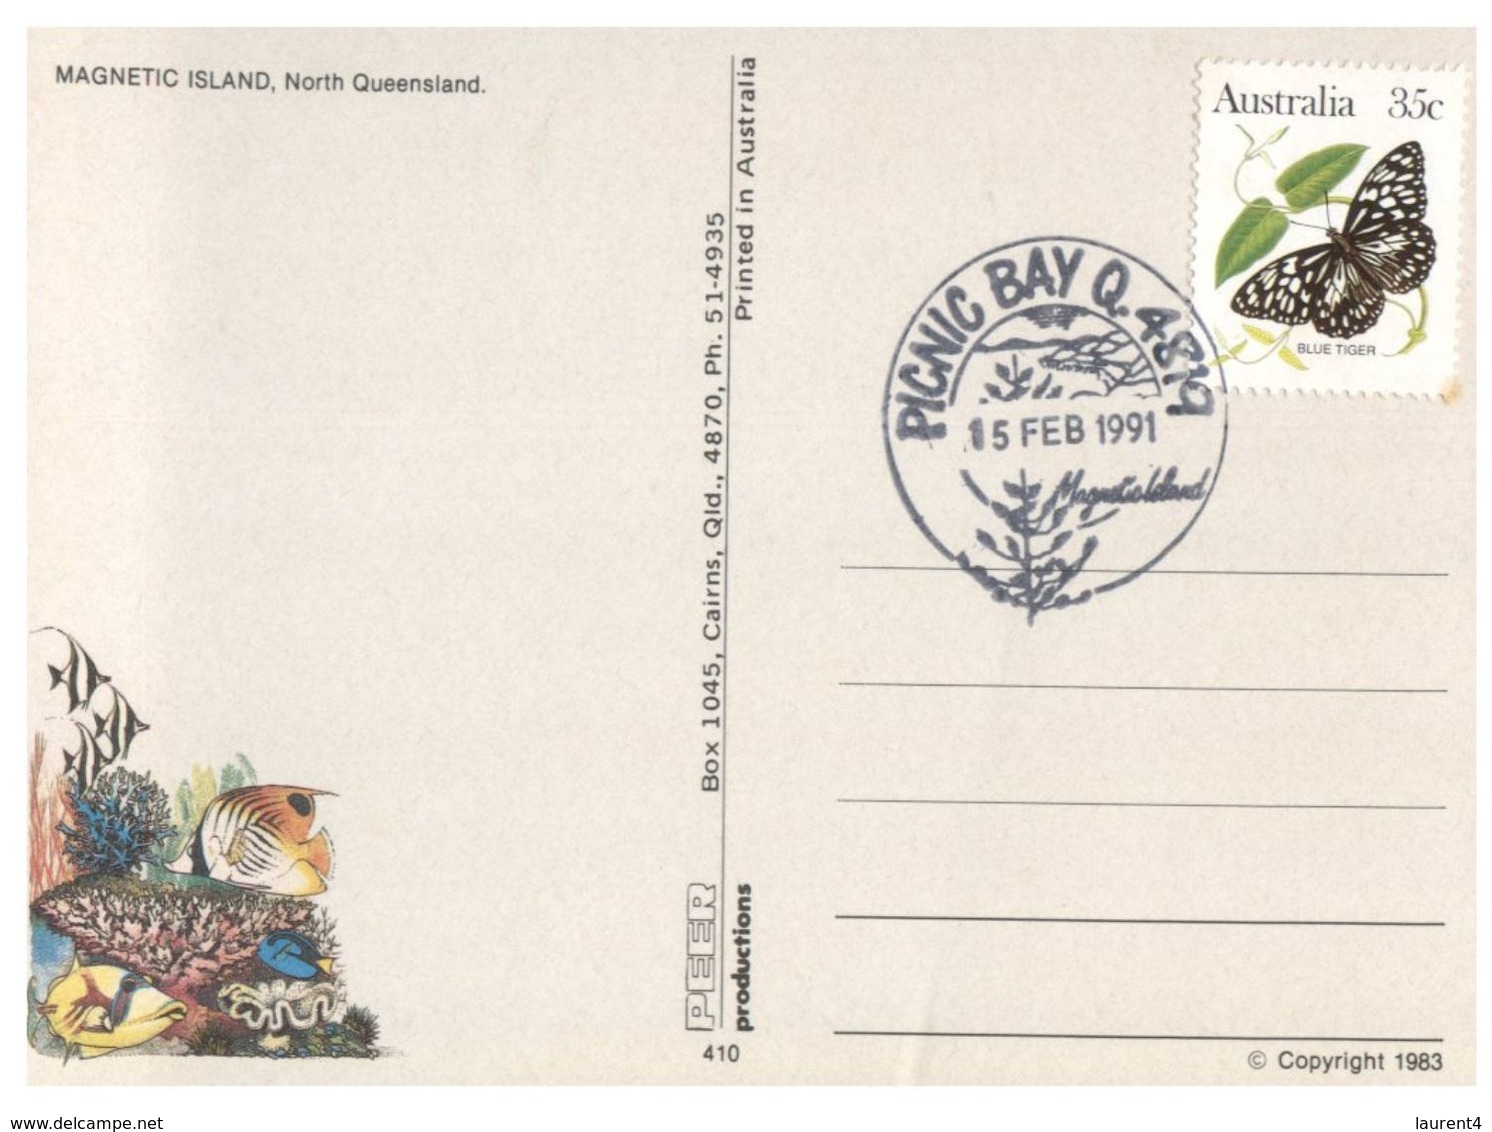 (239) Australia - (stamp And Special Postmark At Back Of Postcard) QLD - Picnic Bay - Magnetic Island - Great Barrier Reef